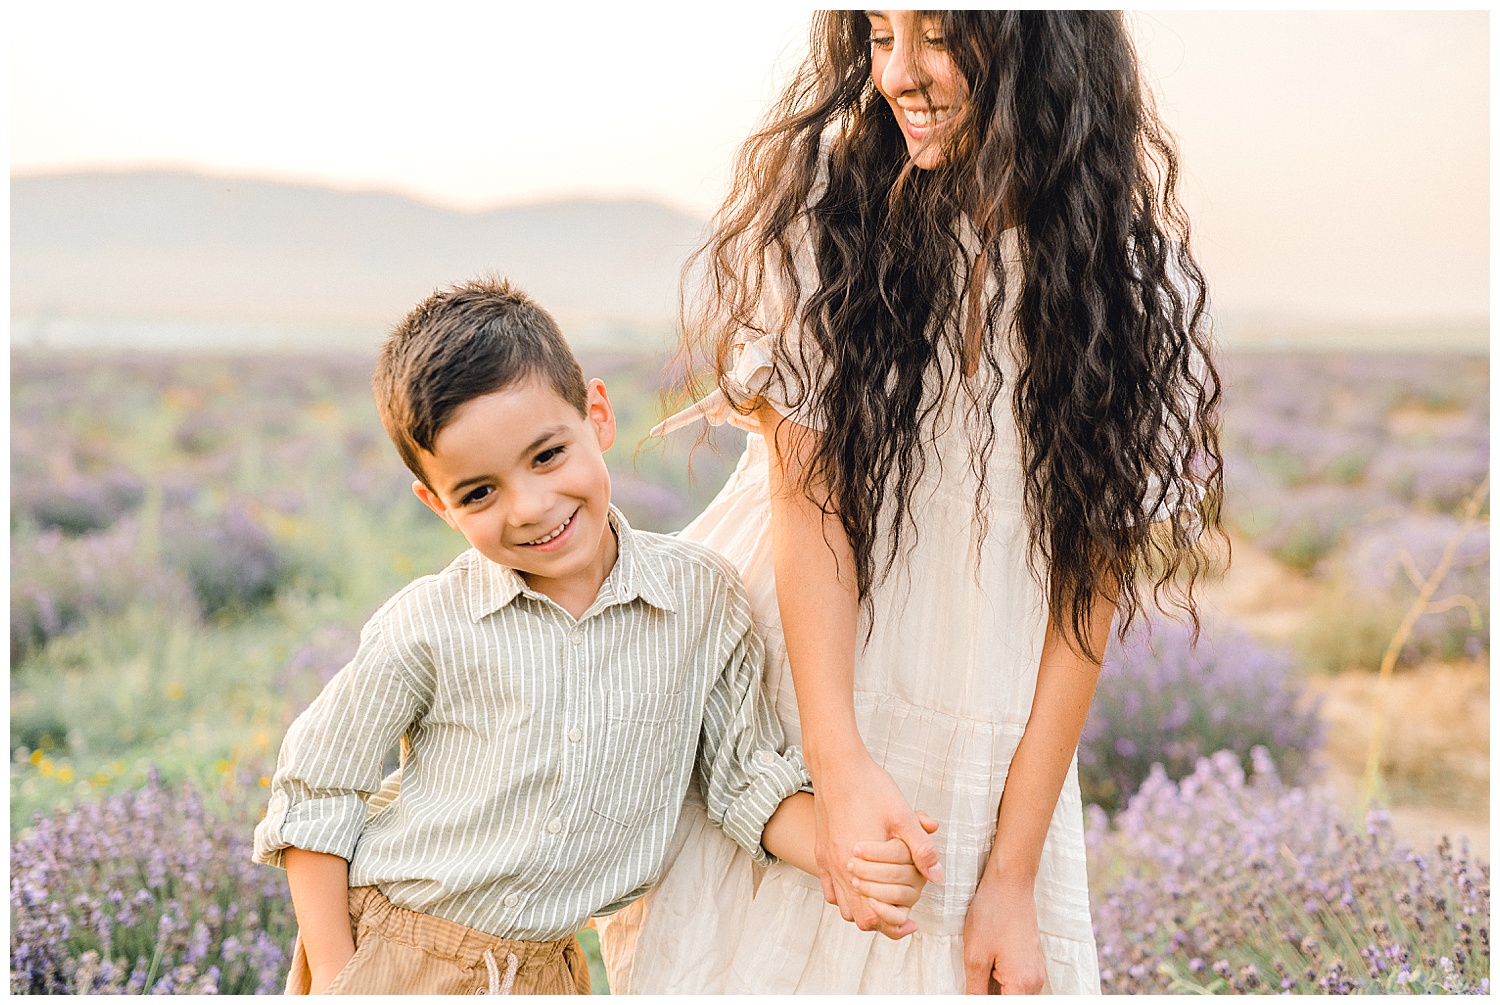 Young Living Lavender Farm | Utah Family Photography